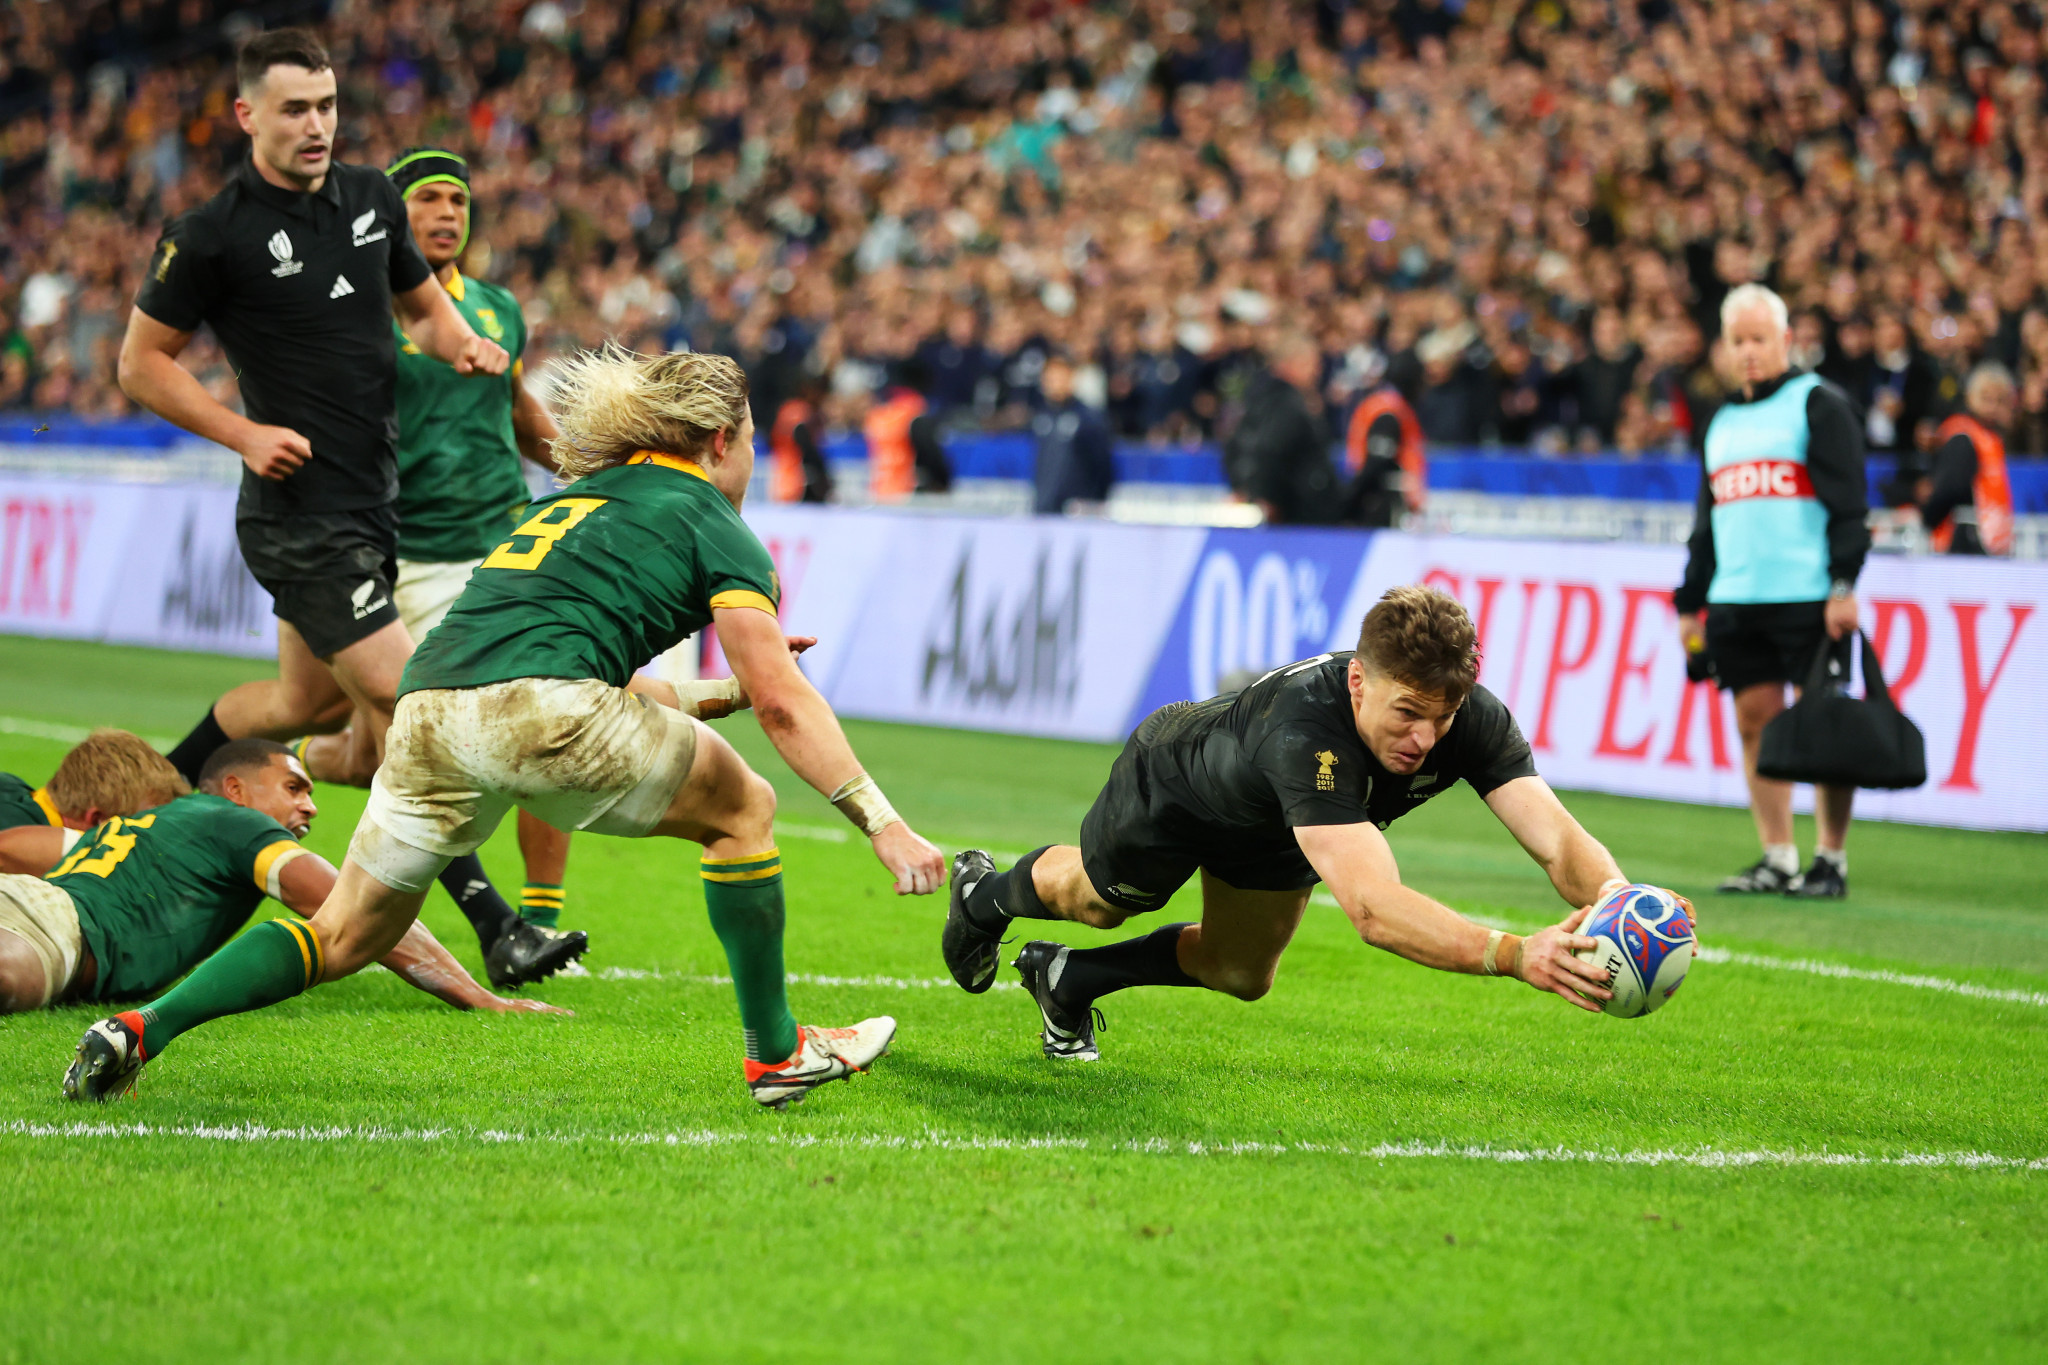 Beauden Barrett, right, scored the first try of the game to keep New Zealand within touching distance ©Getty Images